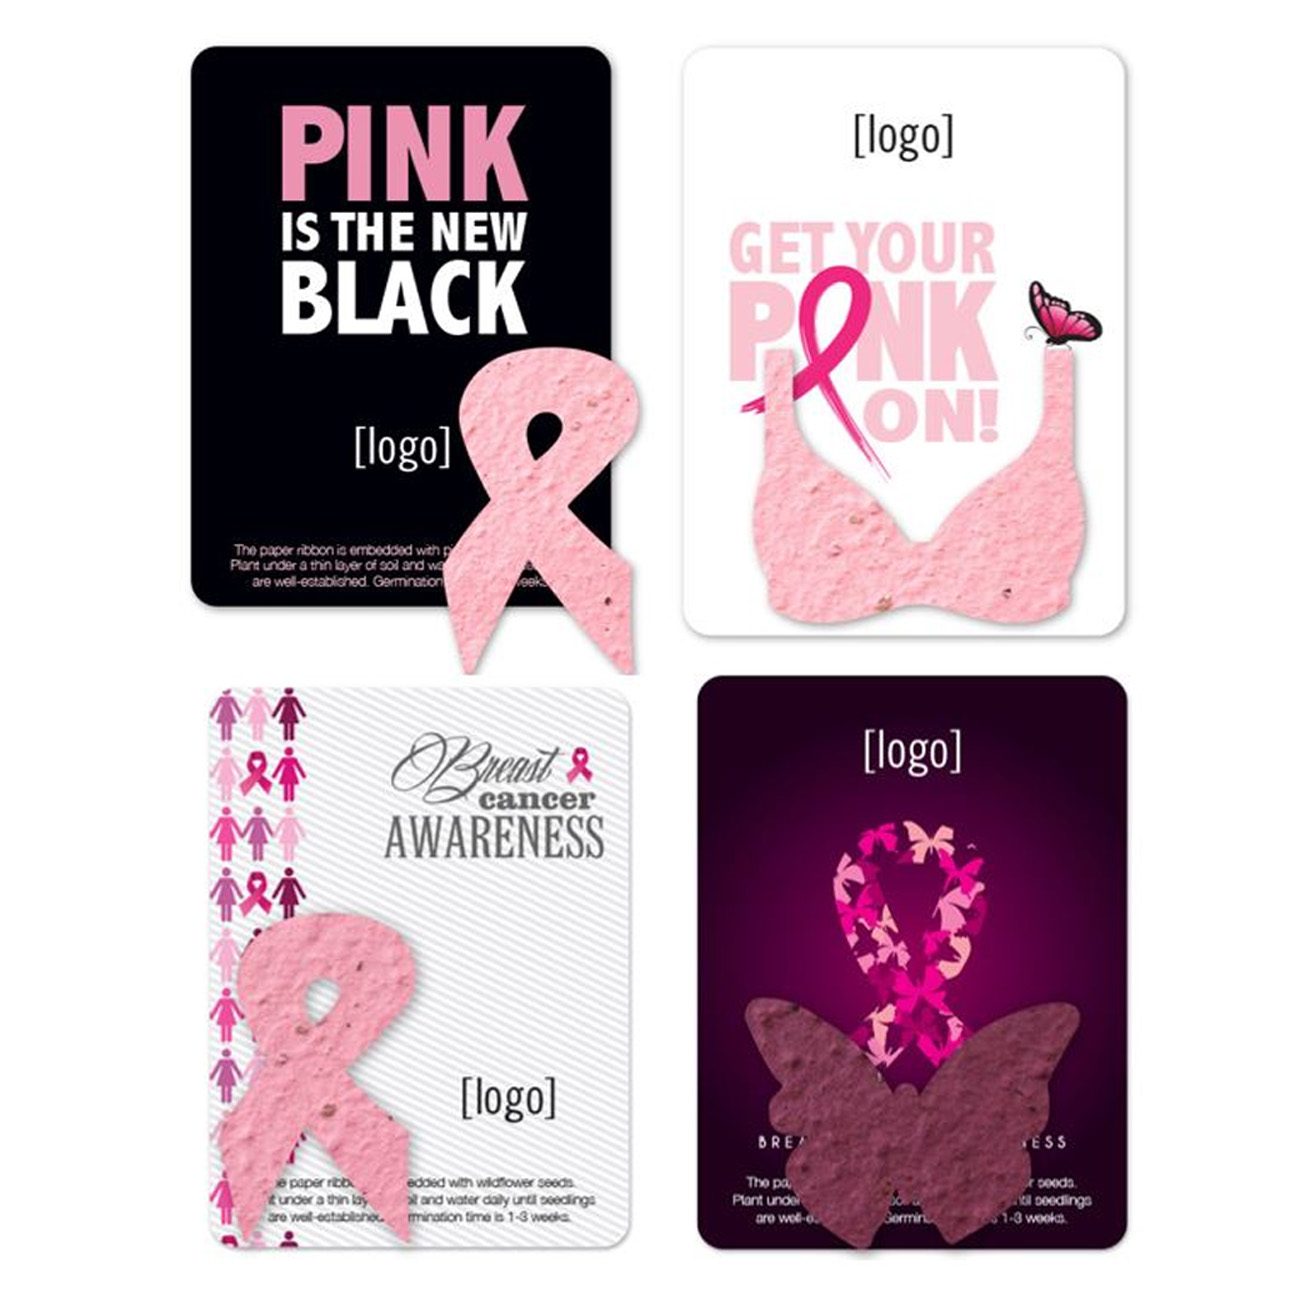 Breast Cancer Awareness Seeded Plantable Gift Pack